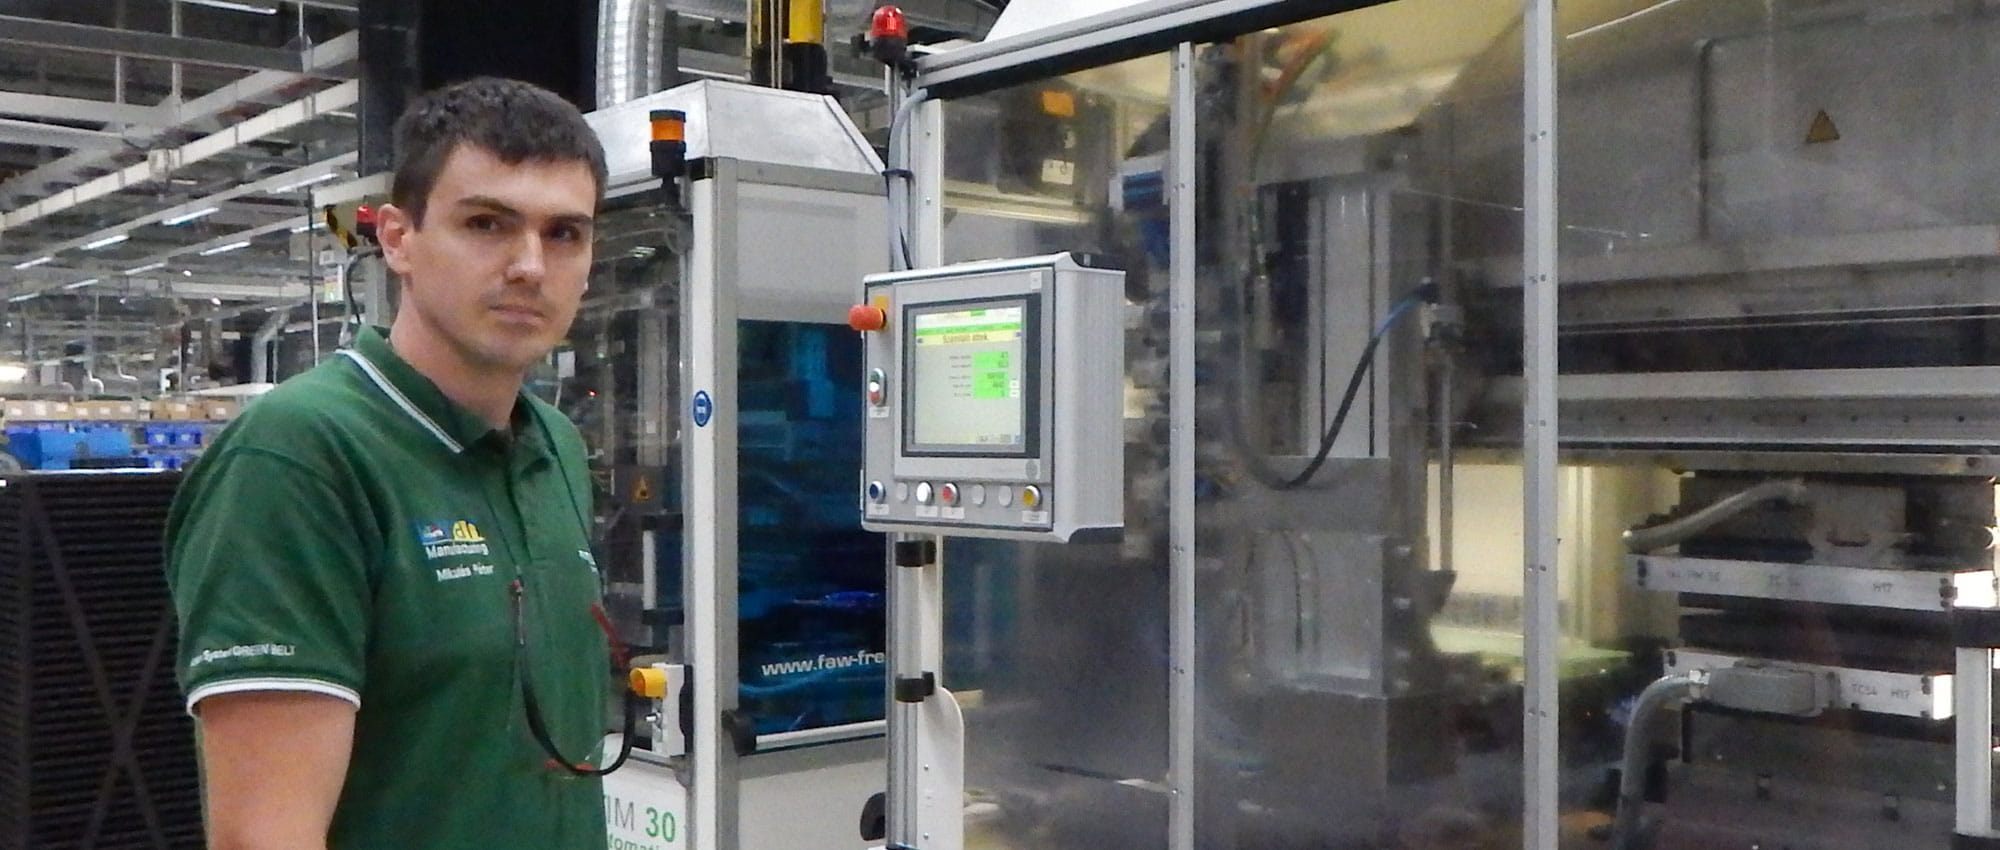 Close up shows Peter Mikulas standing in front of a machine